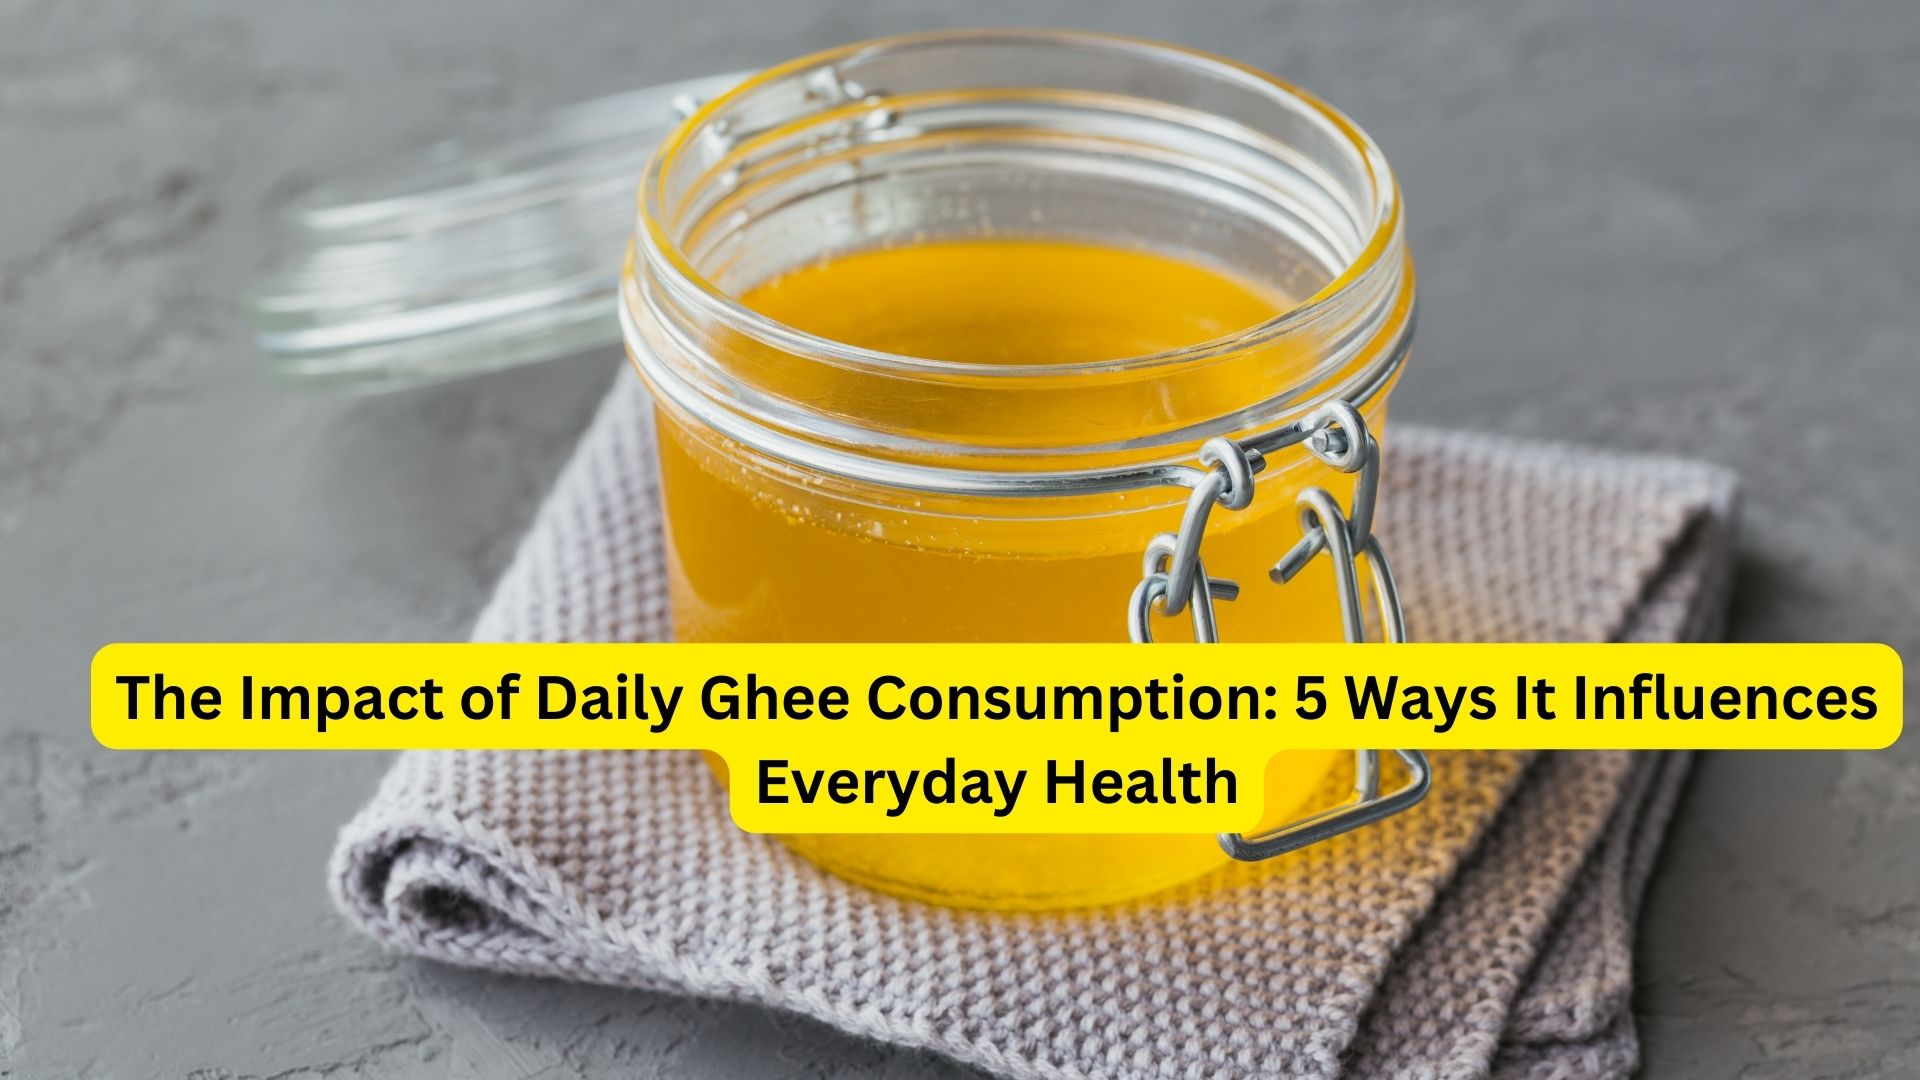 The Impact of Daily Ghee Consumption: 5 Ways It Influences Everyday Health